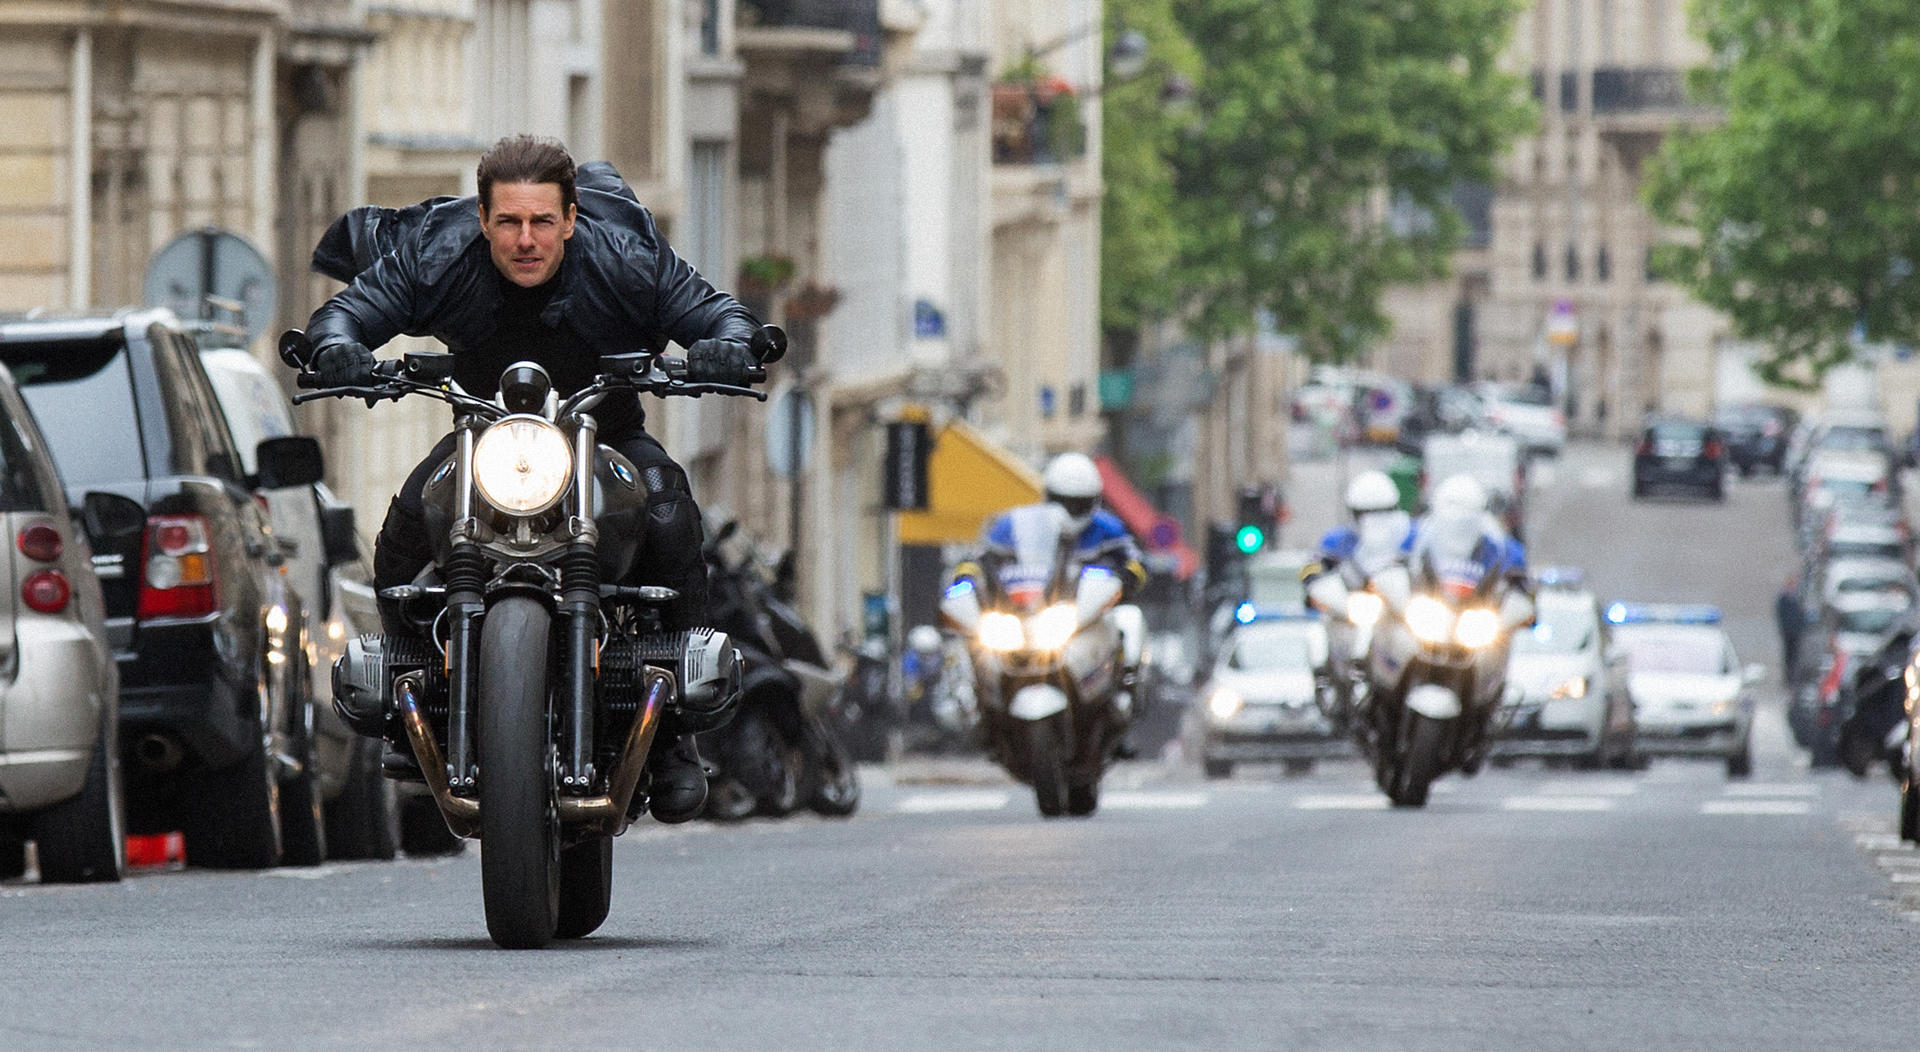 mission-impossible-6-fallout-mit-tom-cruise.jpg